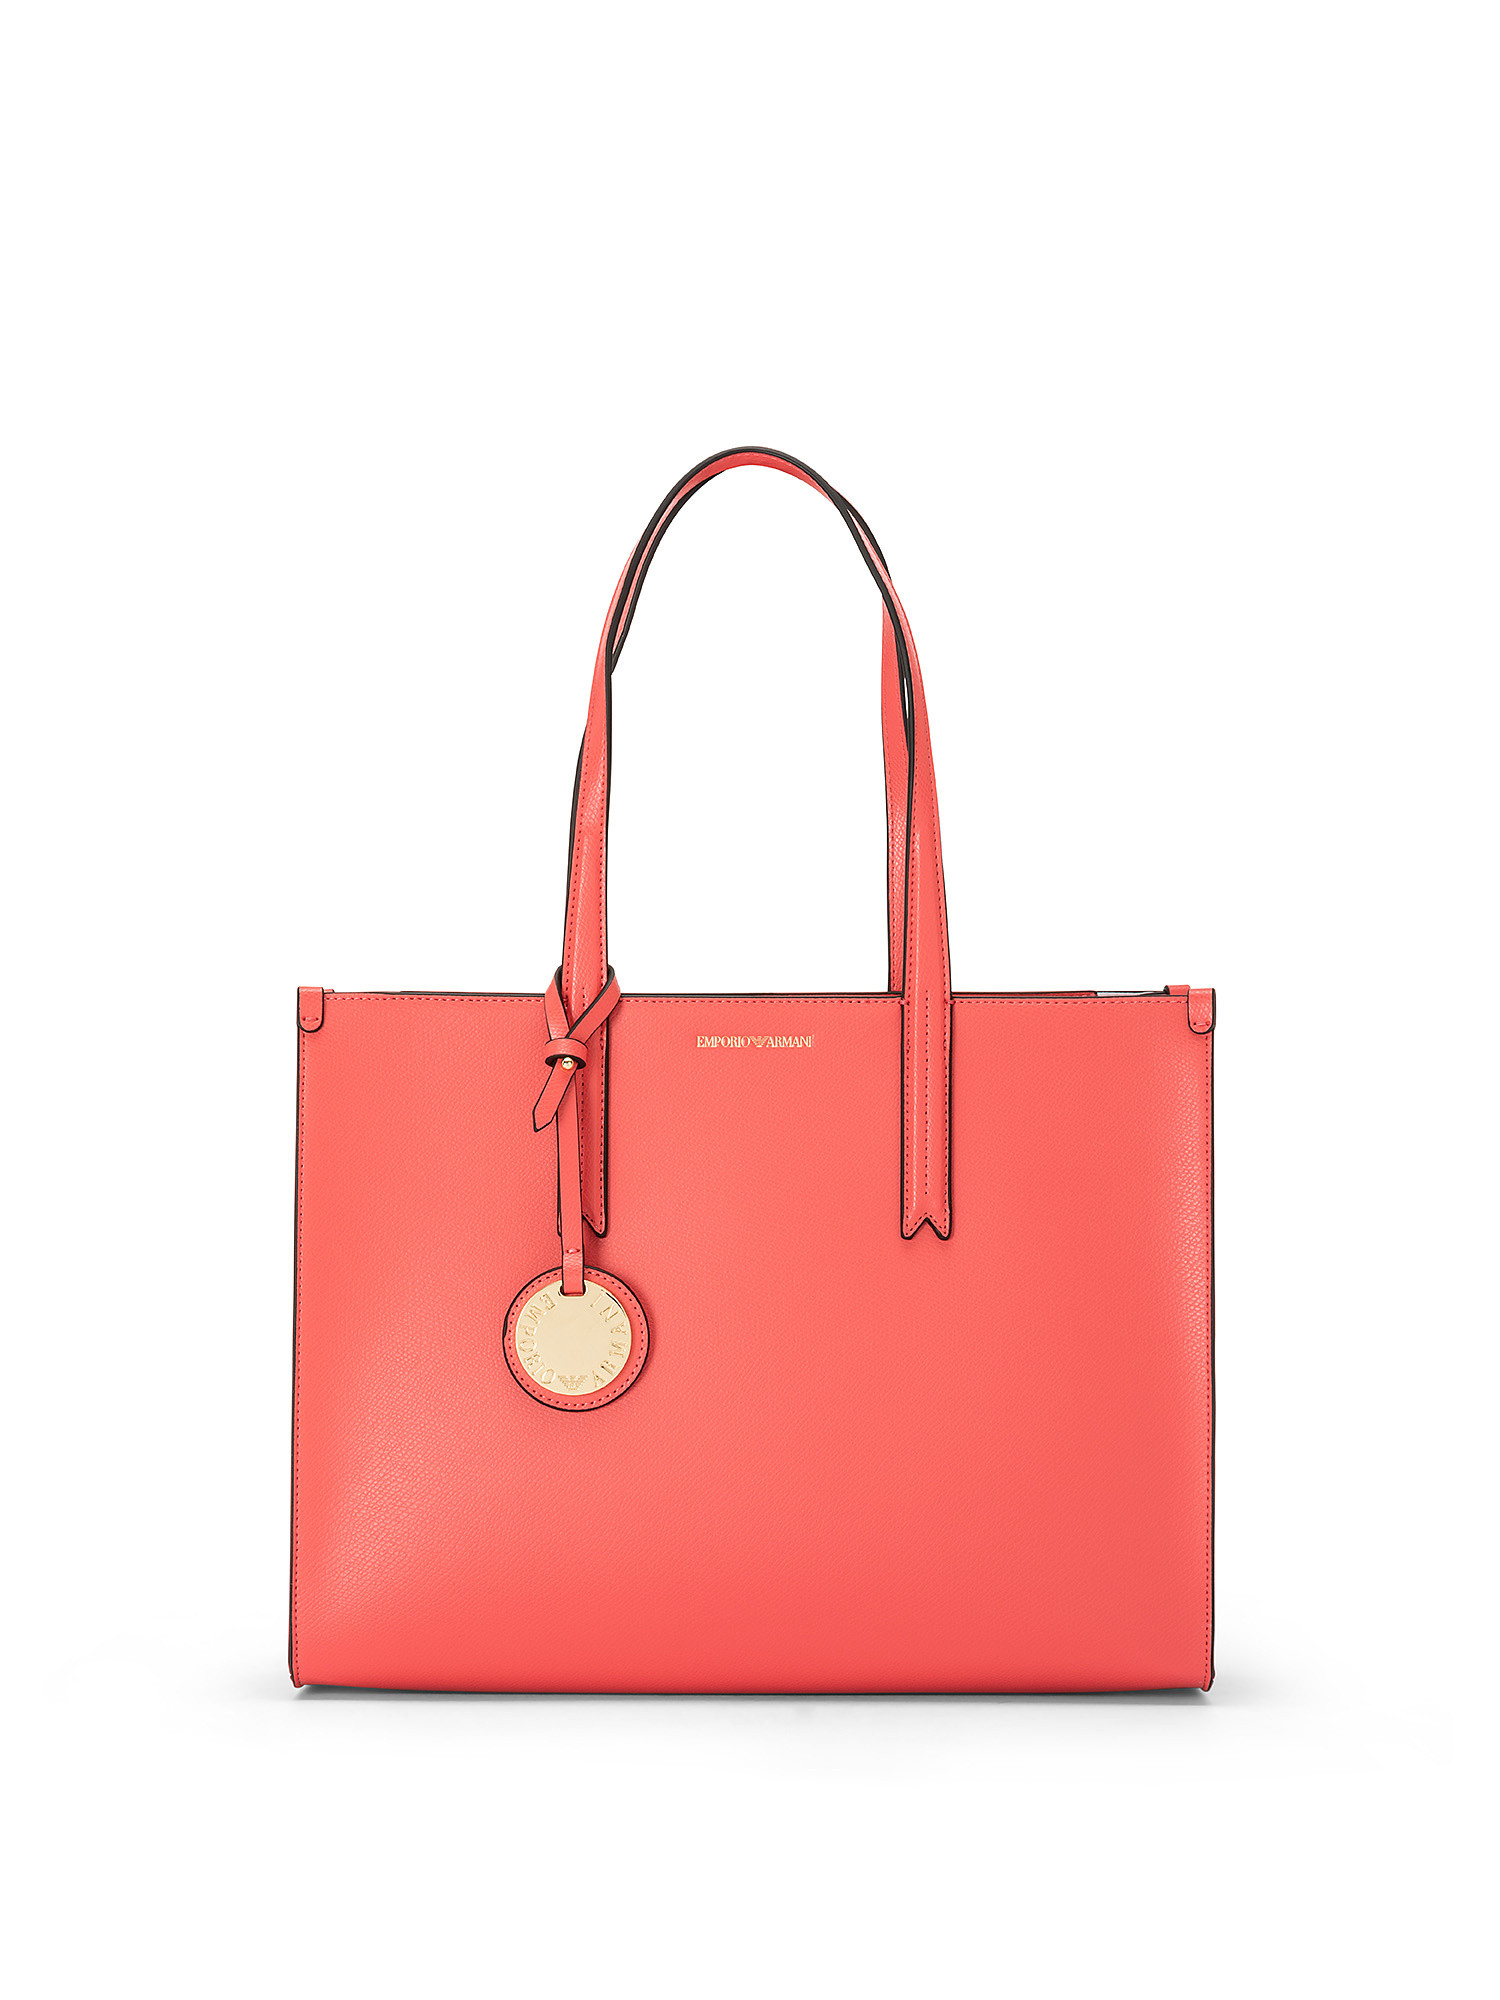 Shopping bag, Coral Red, large image number 0